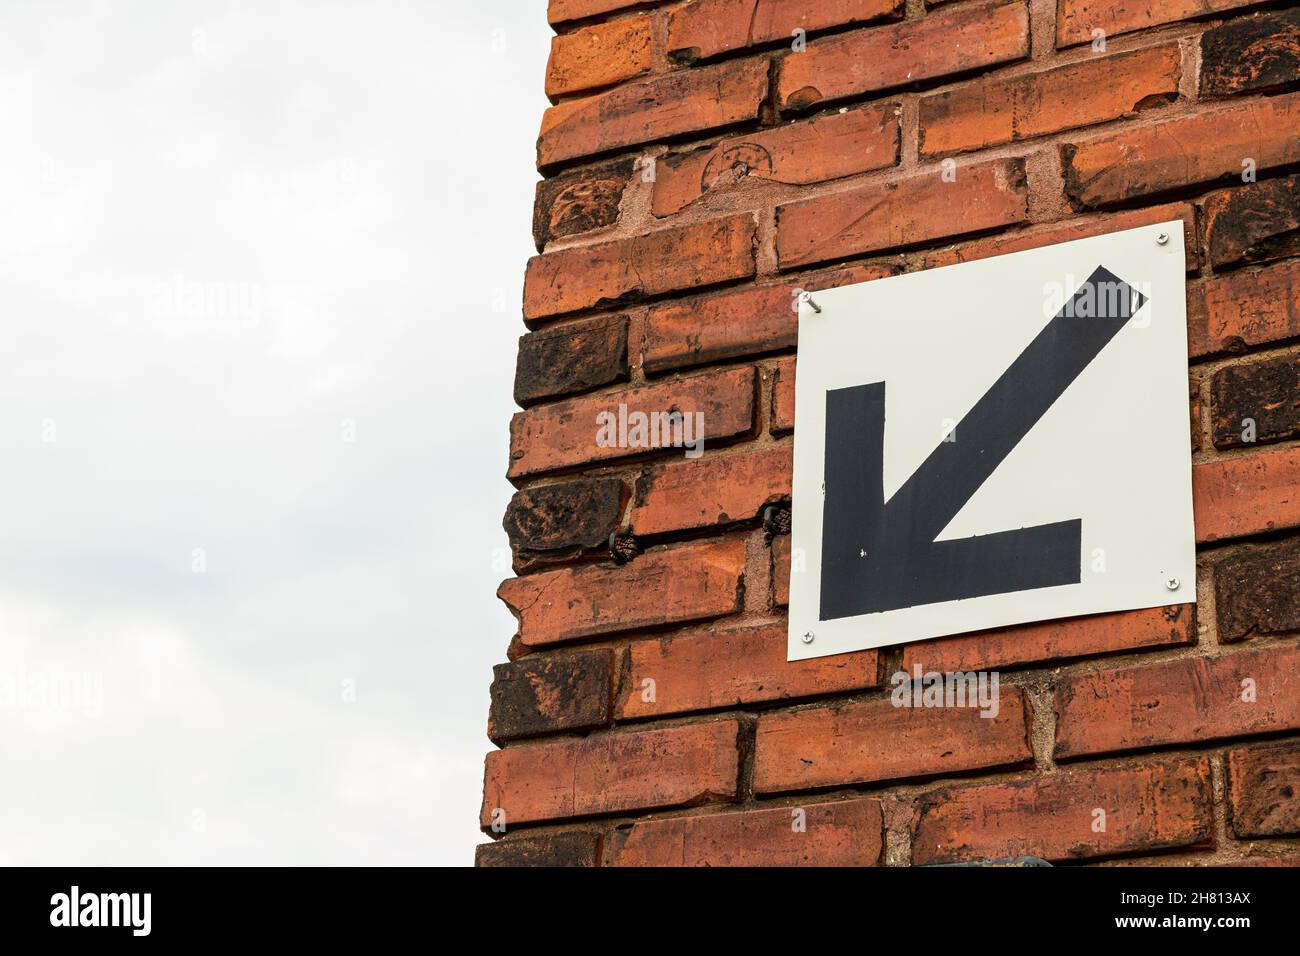 Black arrow on white background pointing down and left. Against background of red brick wall and blue sky. Copy space. Stock Photo